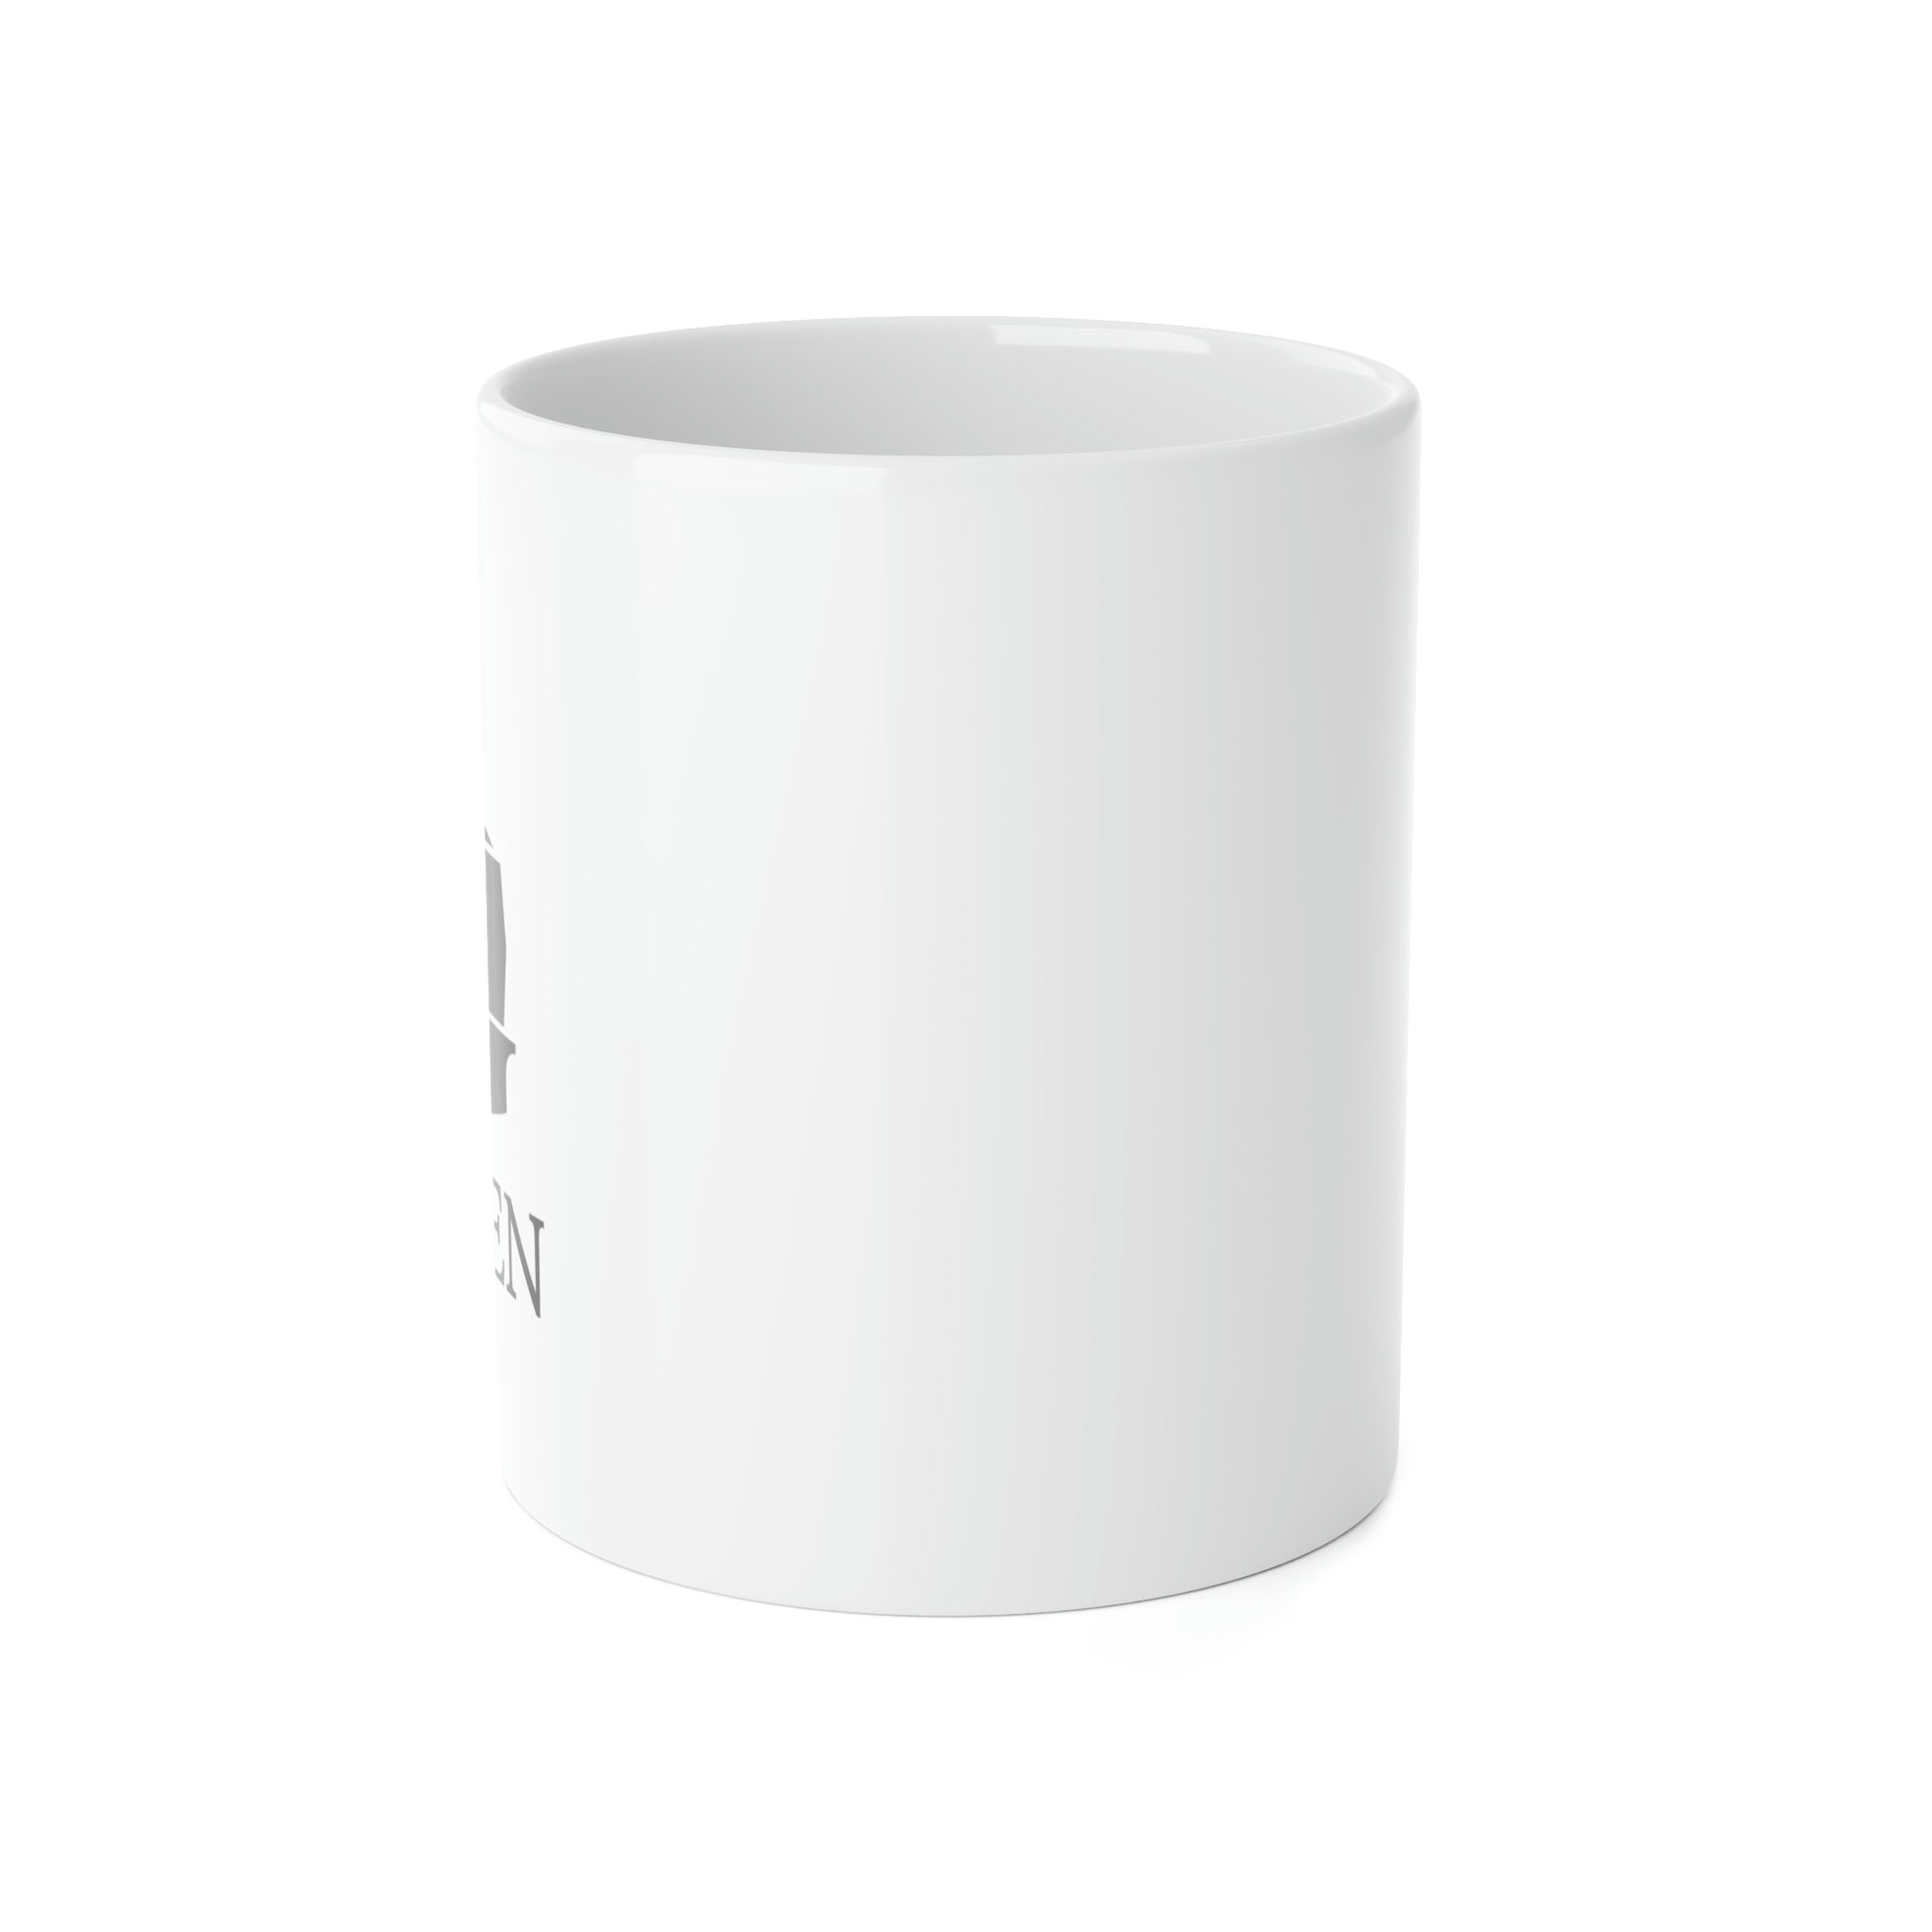 Coffee Cup with Six-Gen Logo